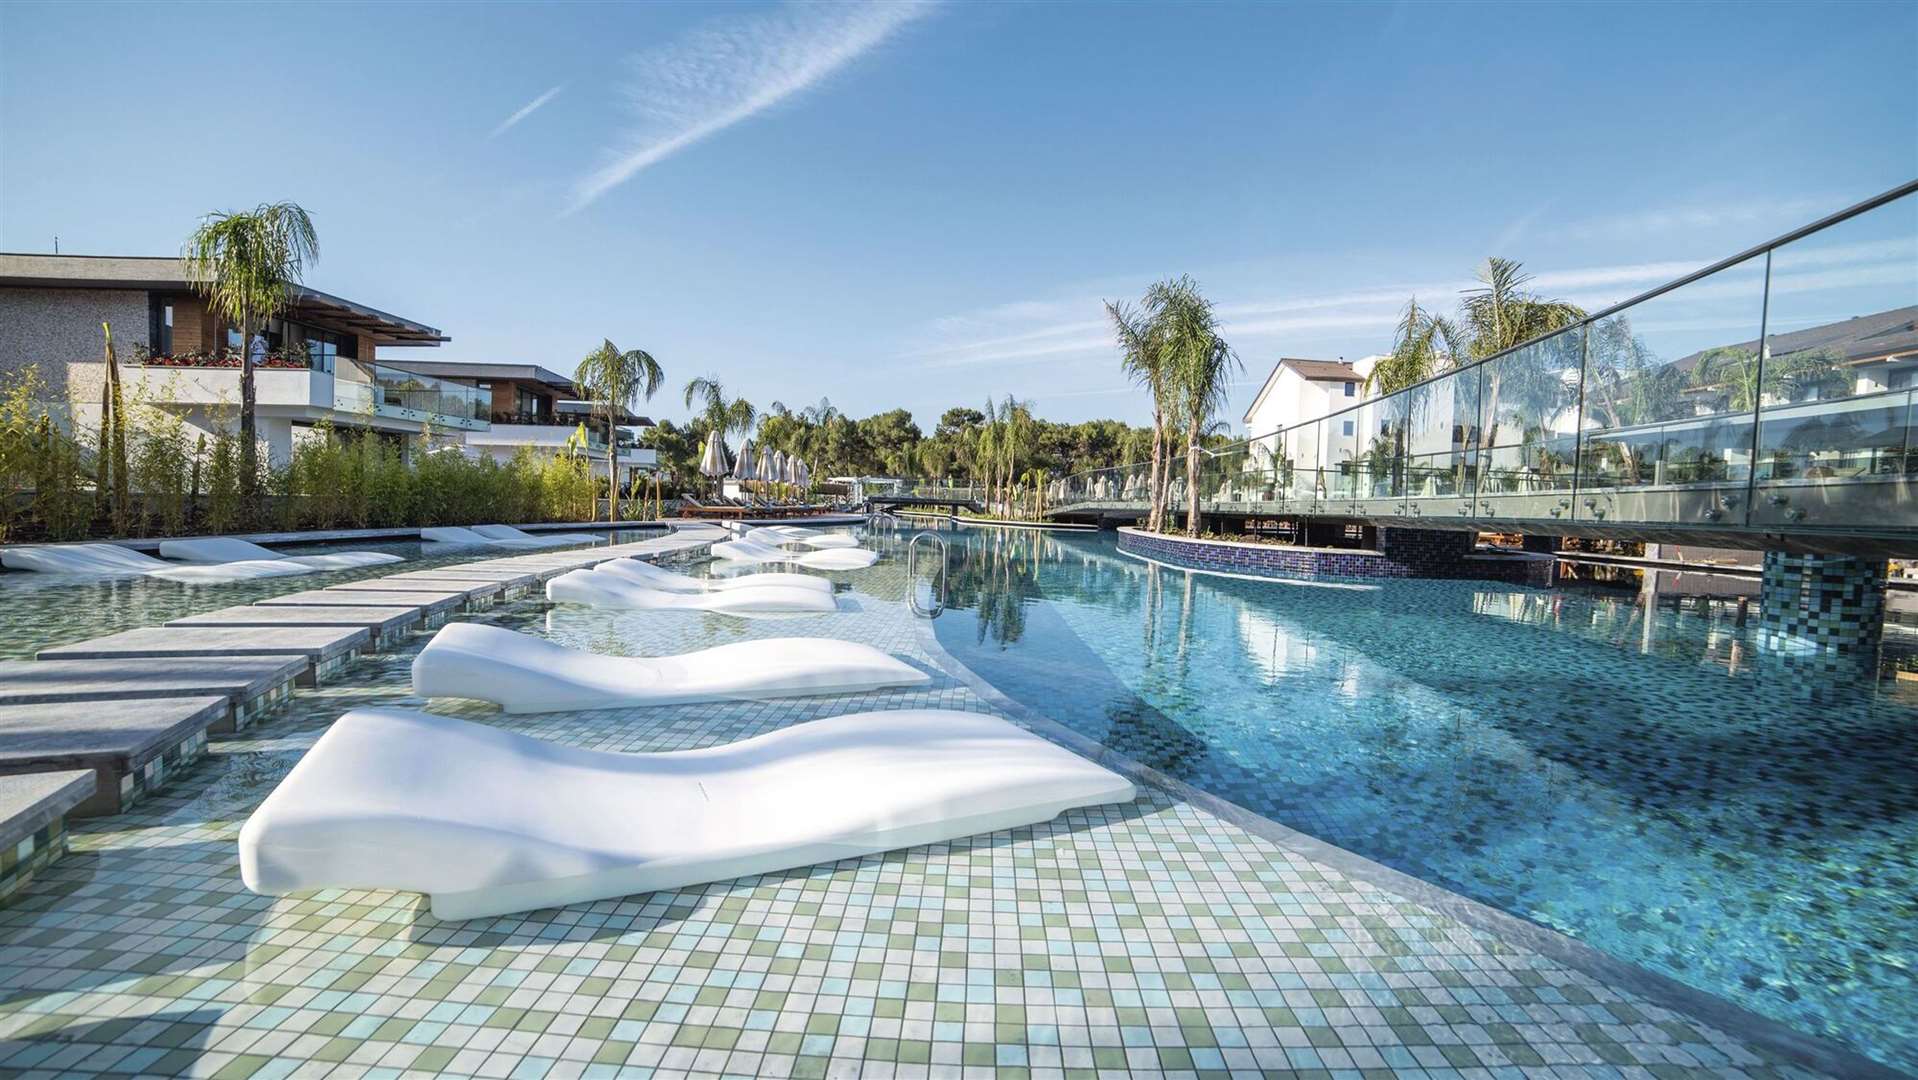 The pool area at The Residence. Picture: PA Photo/TUI